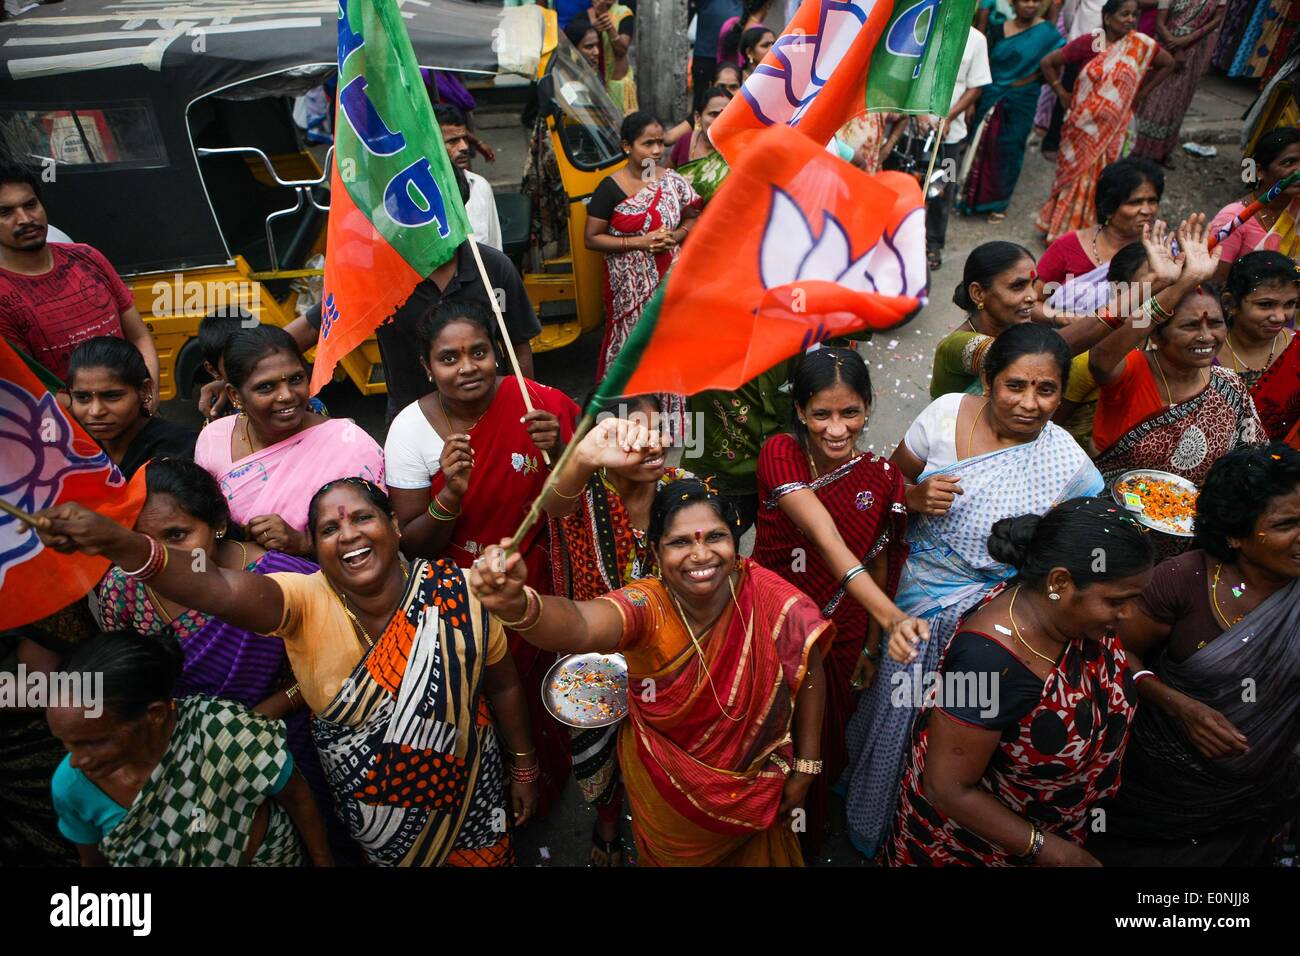 (140517) -- VISAKHAPATNAM, May 17, 2014 (Xinhua) -- Supporters of India's main opposition Bharatiya Janata Party (BJP) celebrate during a parade in Visakhapatnam of Andra Pradesh, India, May 17, 2014. BJP Friday created history by winning the general elections by a landslide, the most resounding victory by any party in the last 30 years, decimating the Nehru-Gandhi dynasty-led ruling Congress Party. (Xinhua/Zheng Huansong) Stock Photo